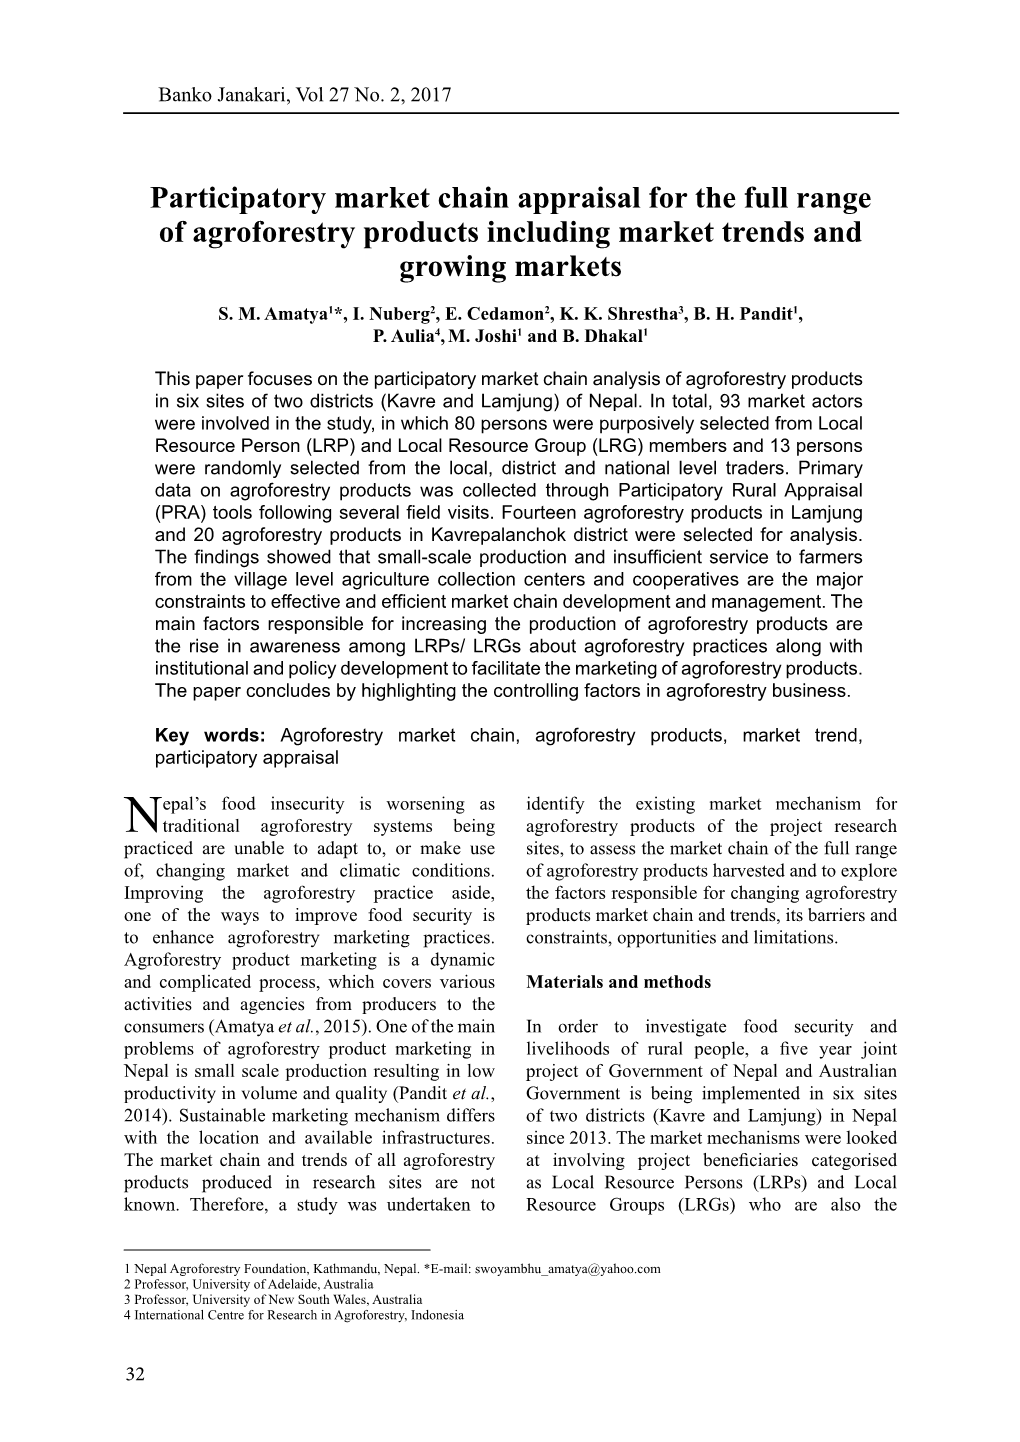 Participatory Market Chain Appraisal for the Full Range of Agroforestry Products Including Market Trends and Growing Markets